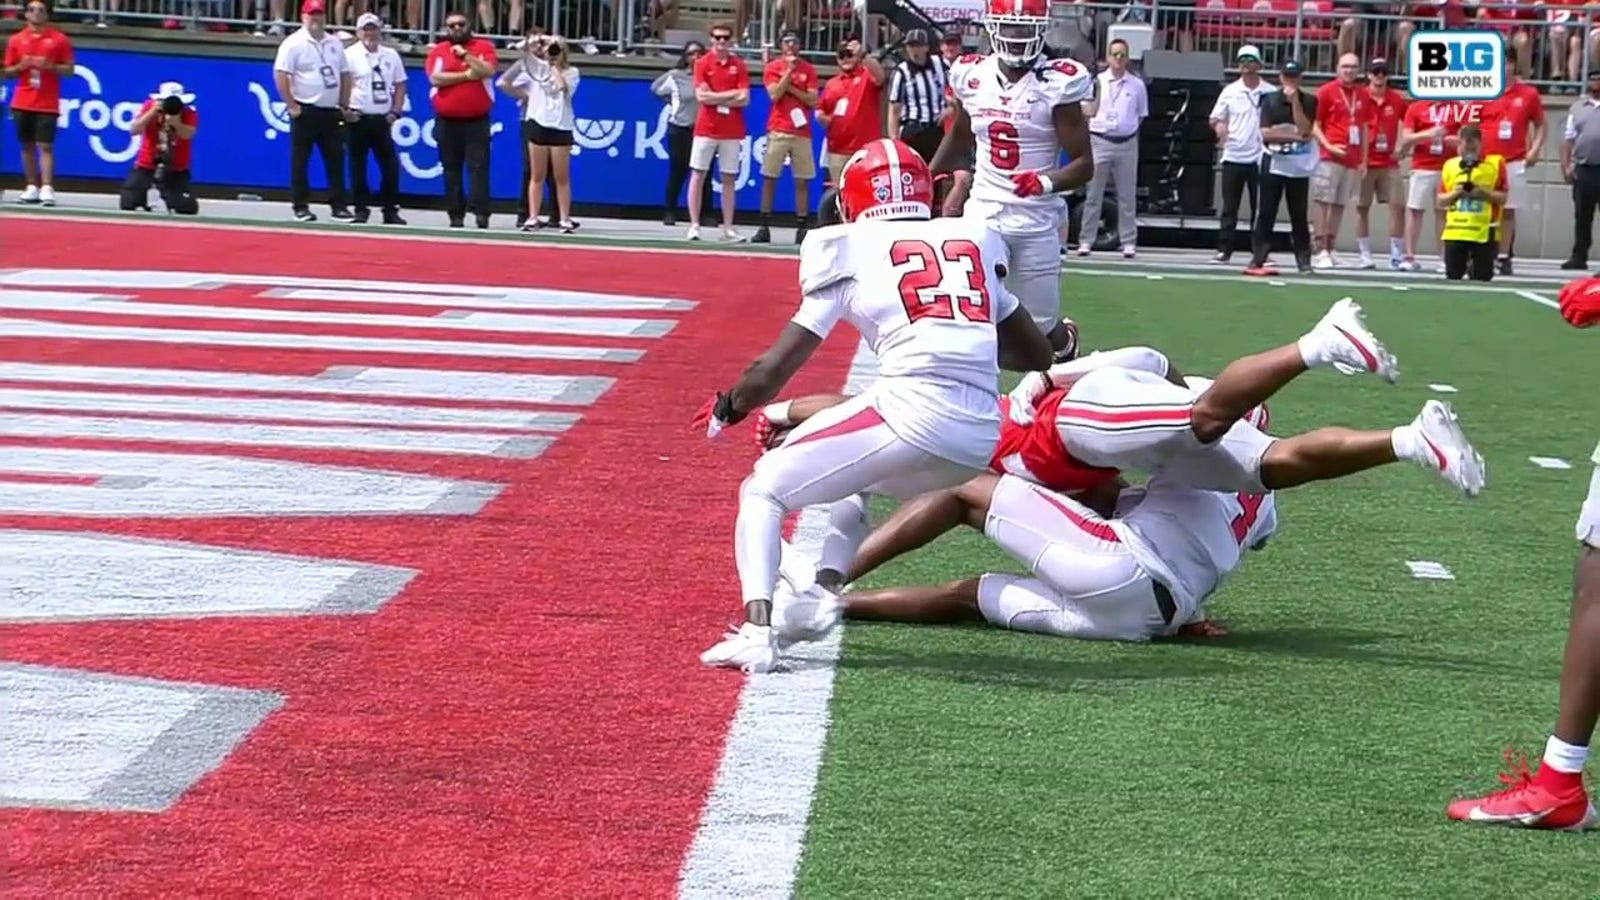 TreVeyon Henderson rushes for a 13-yard TD to extend Ohio State's lead